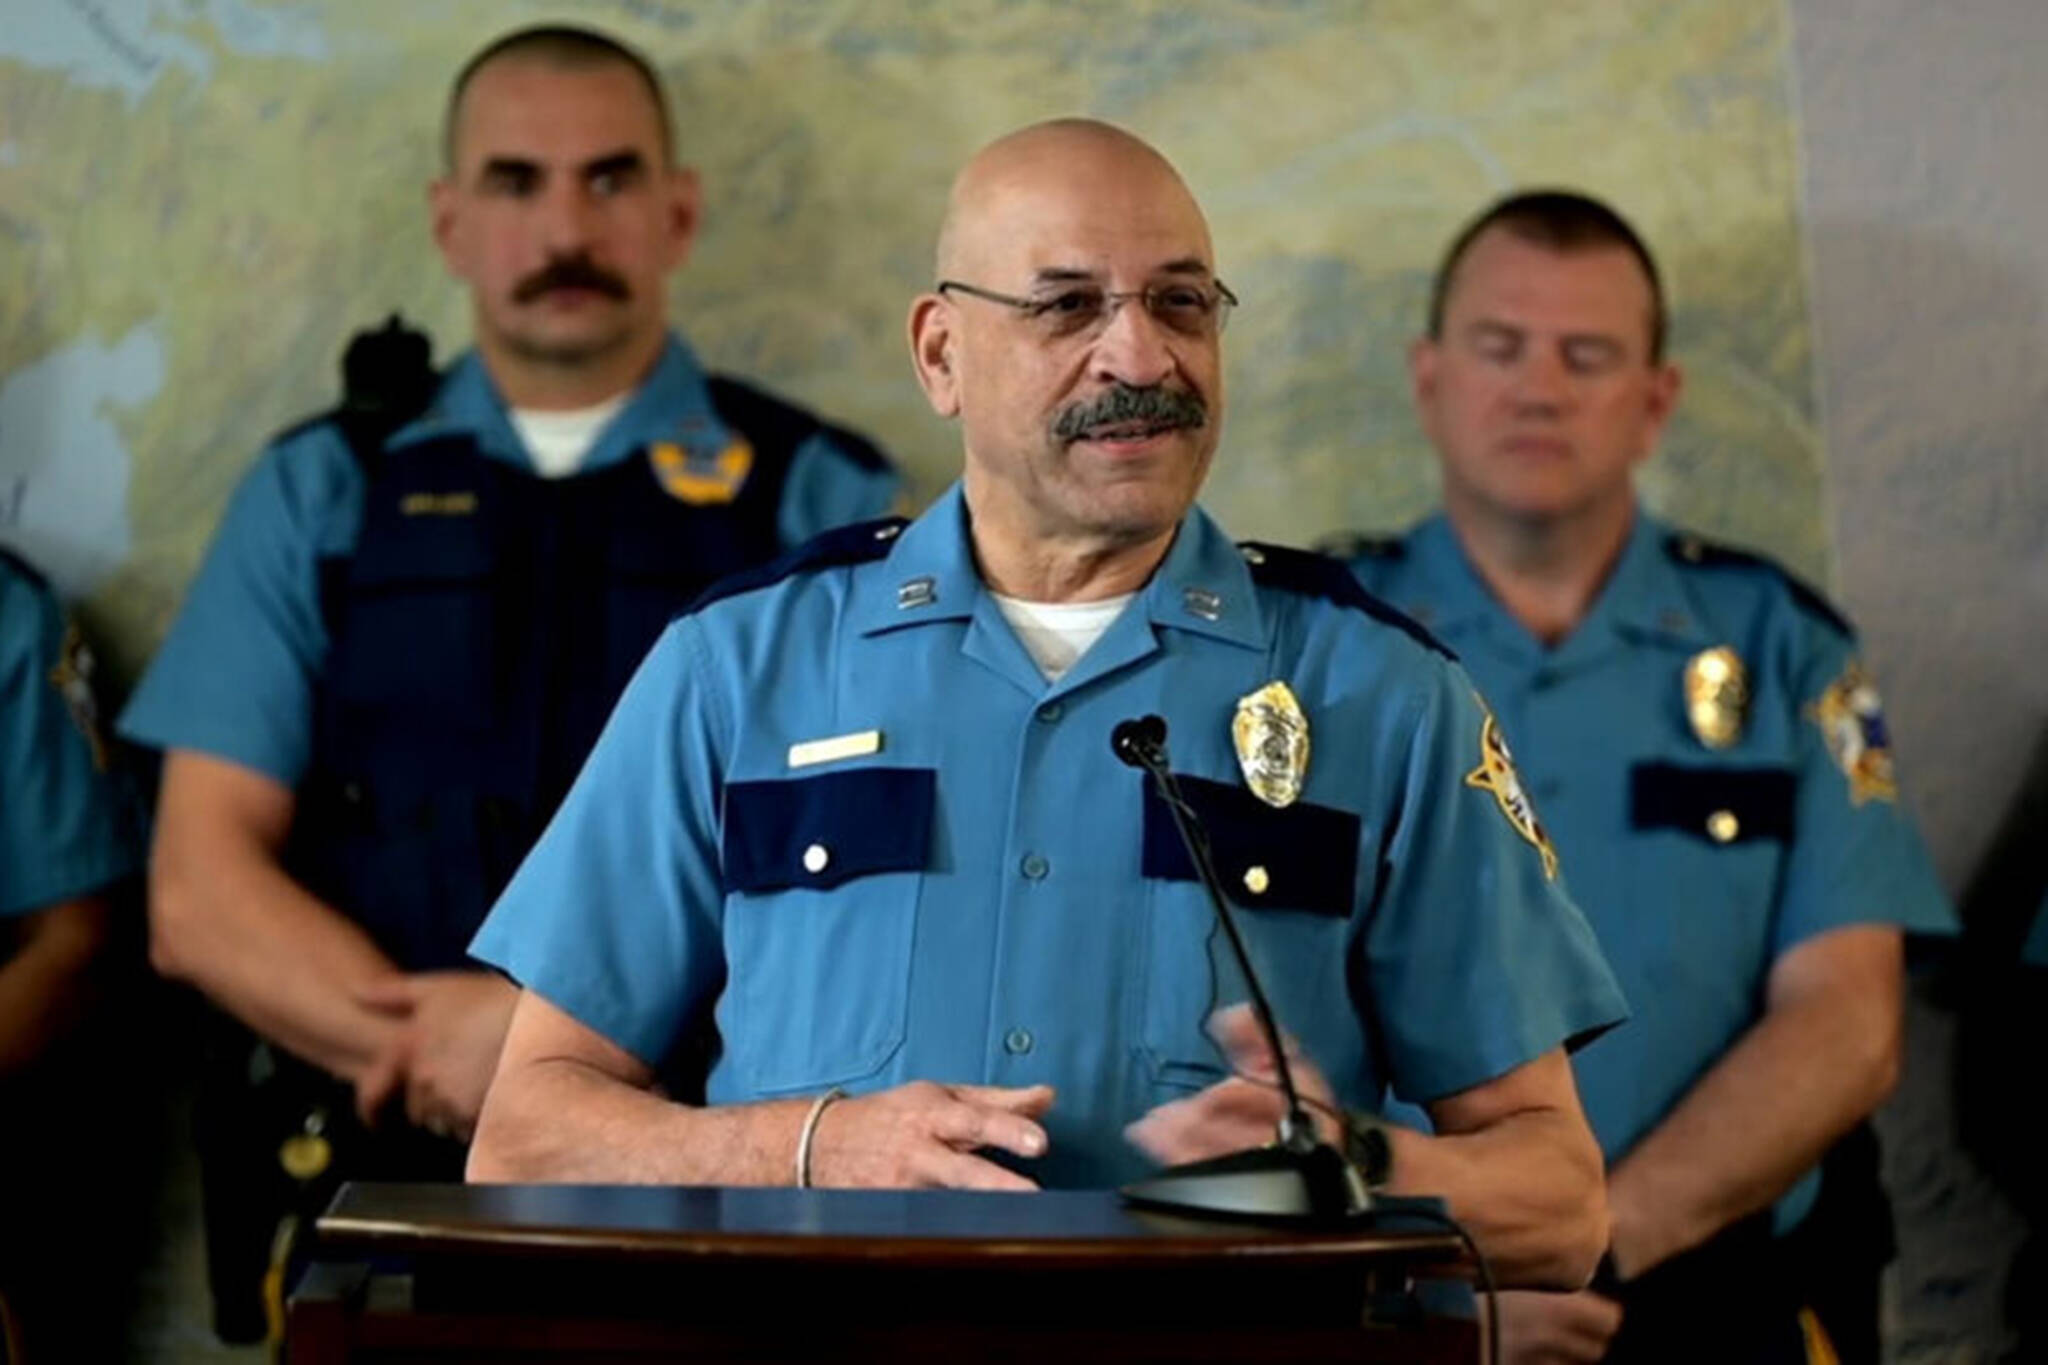 Alaska State Troopers Capt. Maurice “Mo” Hughes is seen at a news conference on Wednesday, Aug. 31, 2022 during a ceremony naming him the first Black leader of the Alaska State Troopers. (Video screenshot)